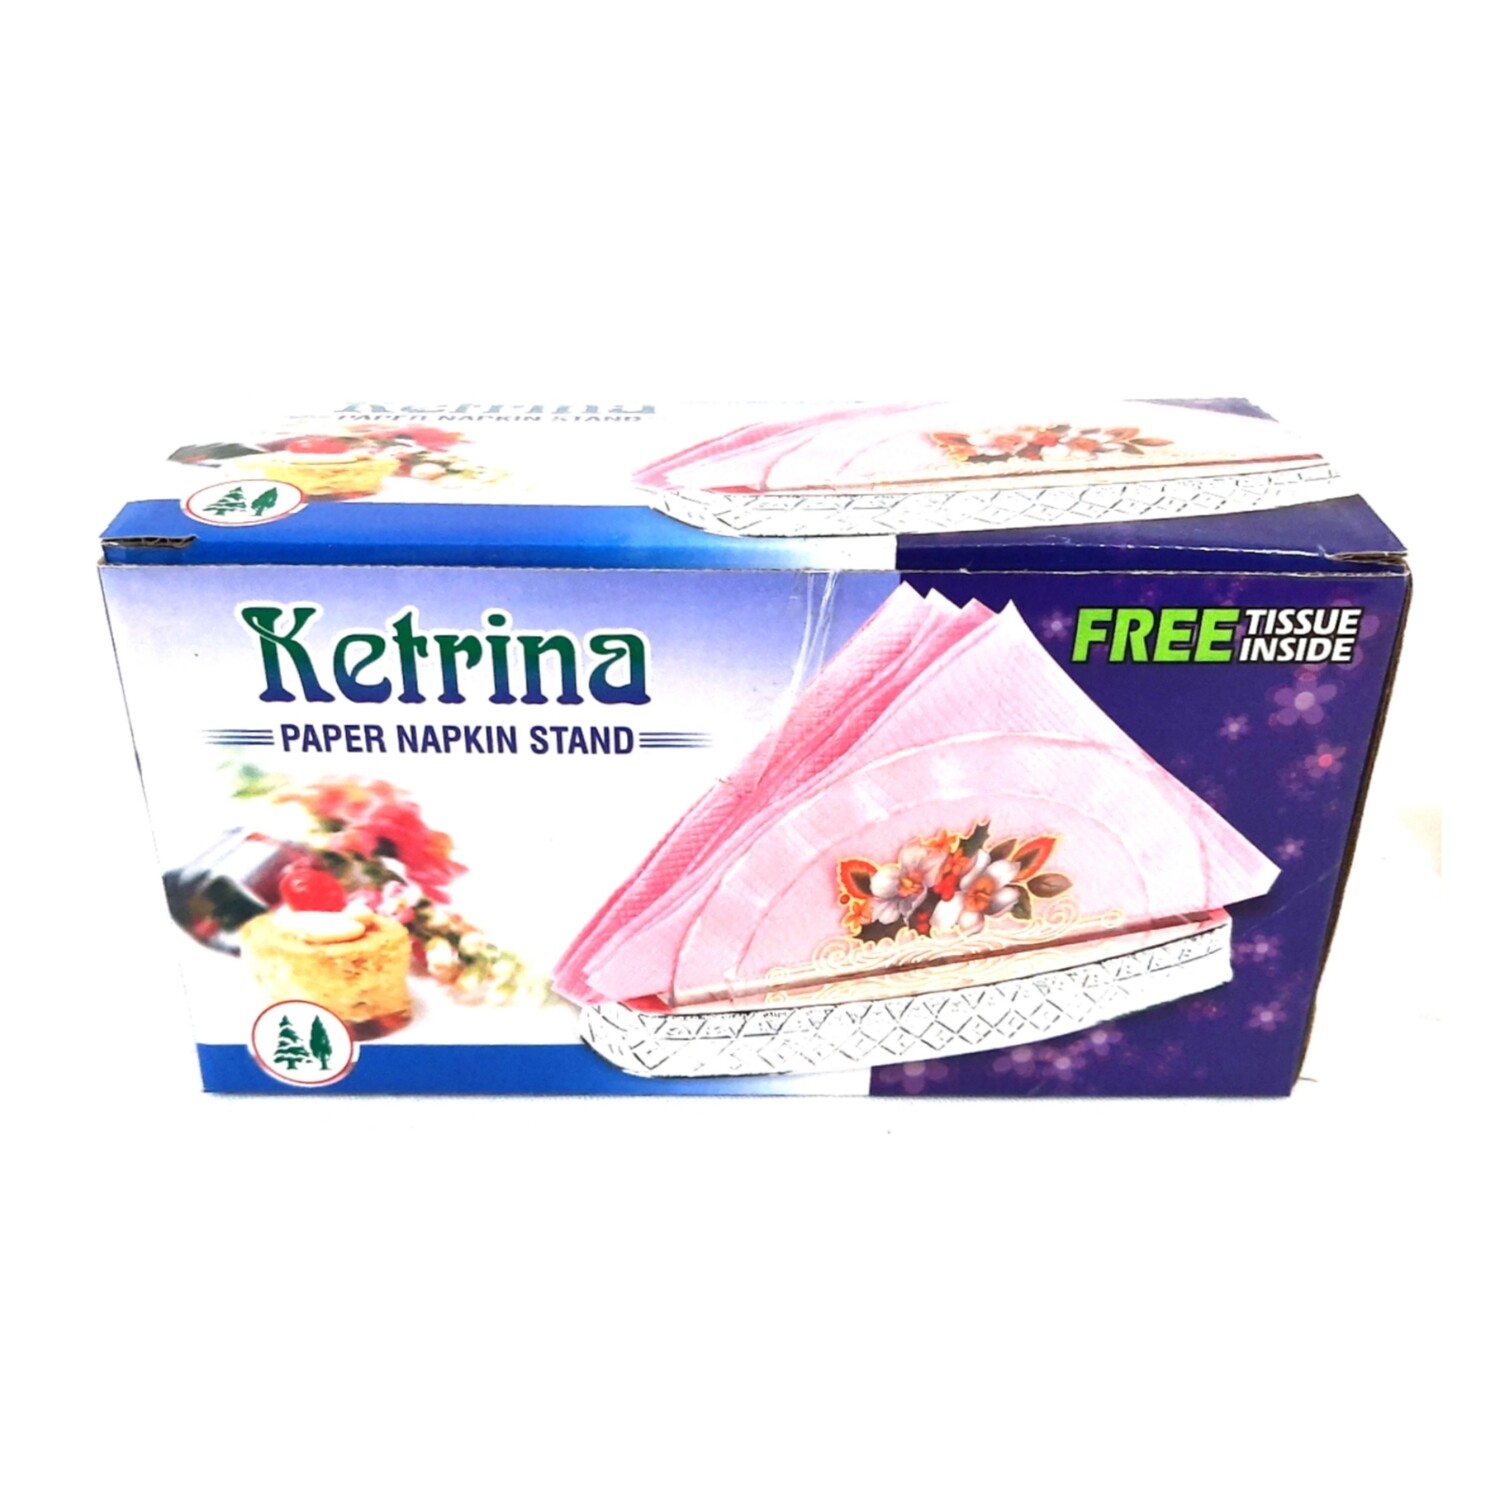 Ketrina Paper Napkin Stand With Free Tissue